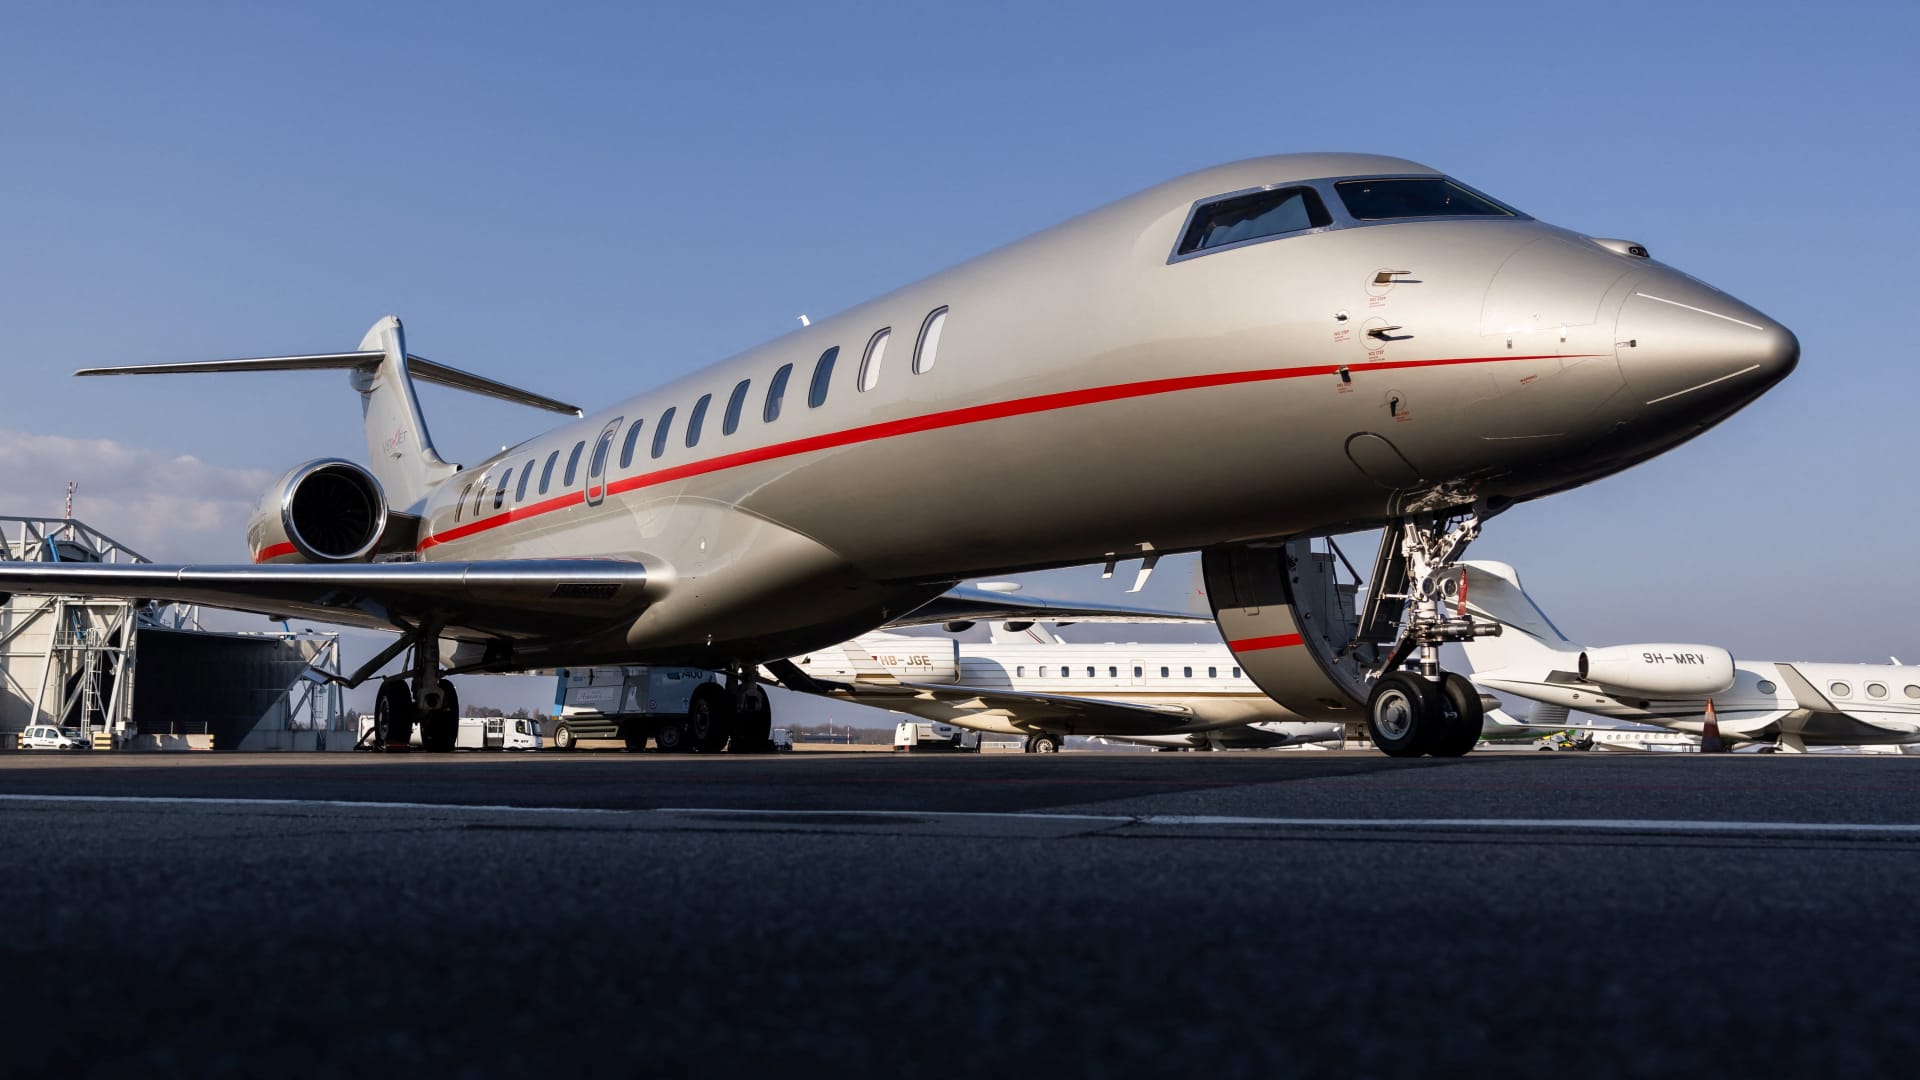 A Bombardier Global 7500 business jet is pictured during a presentation of the brand new aircraft from the global business aviation company at Geneva airport on March 3, 2022. 